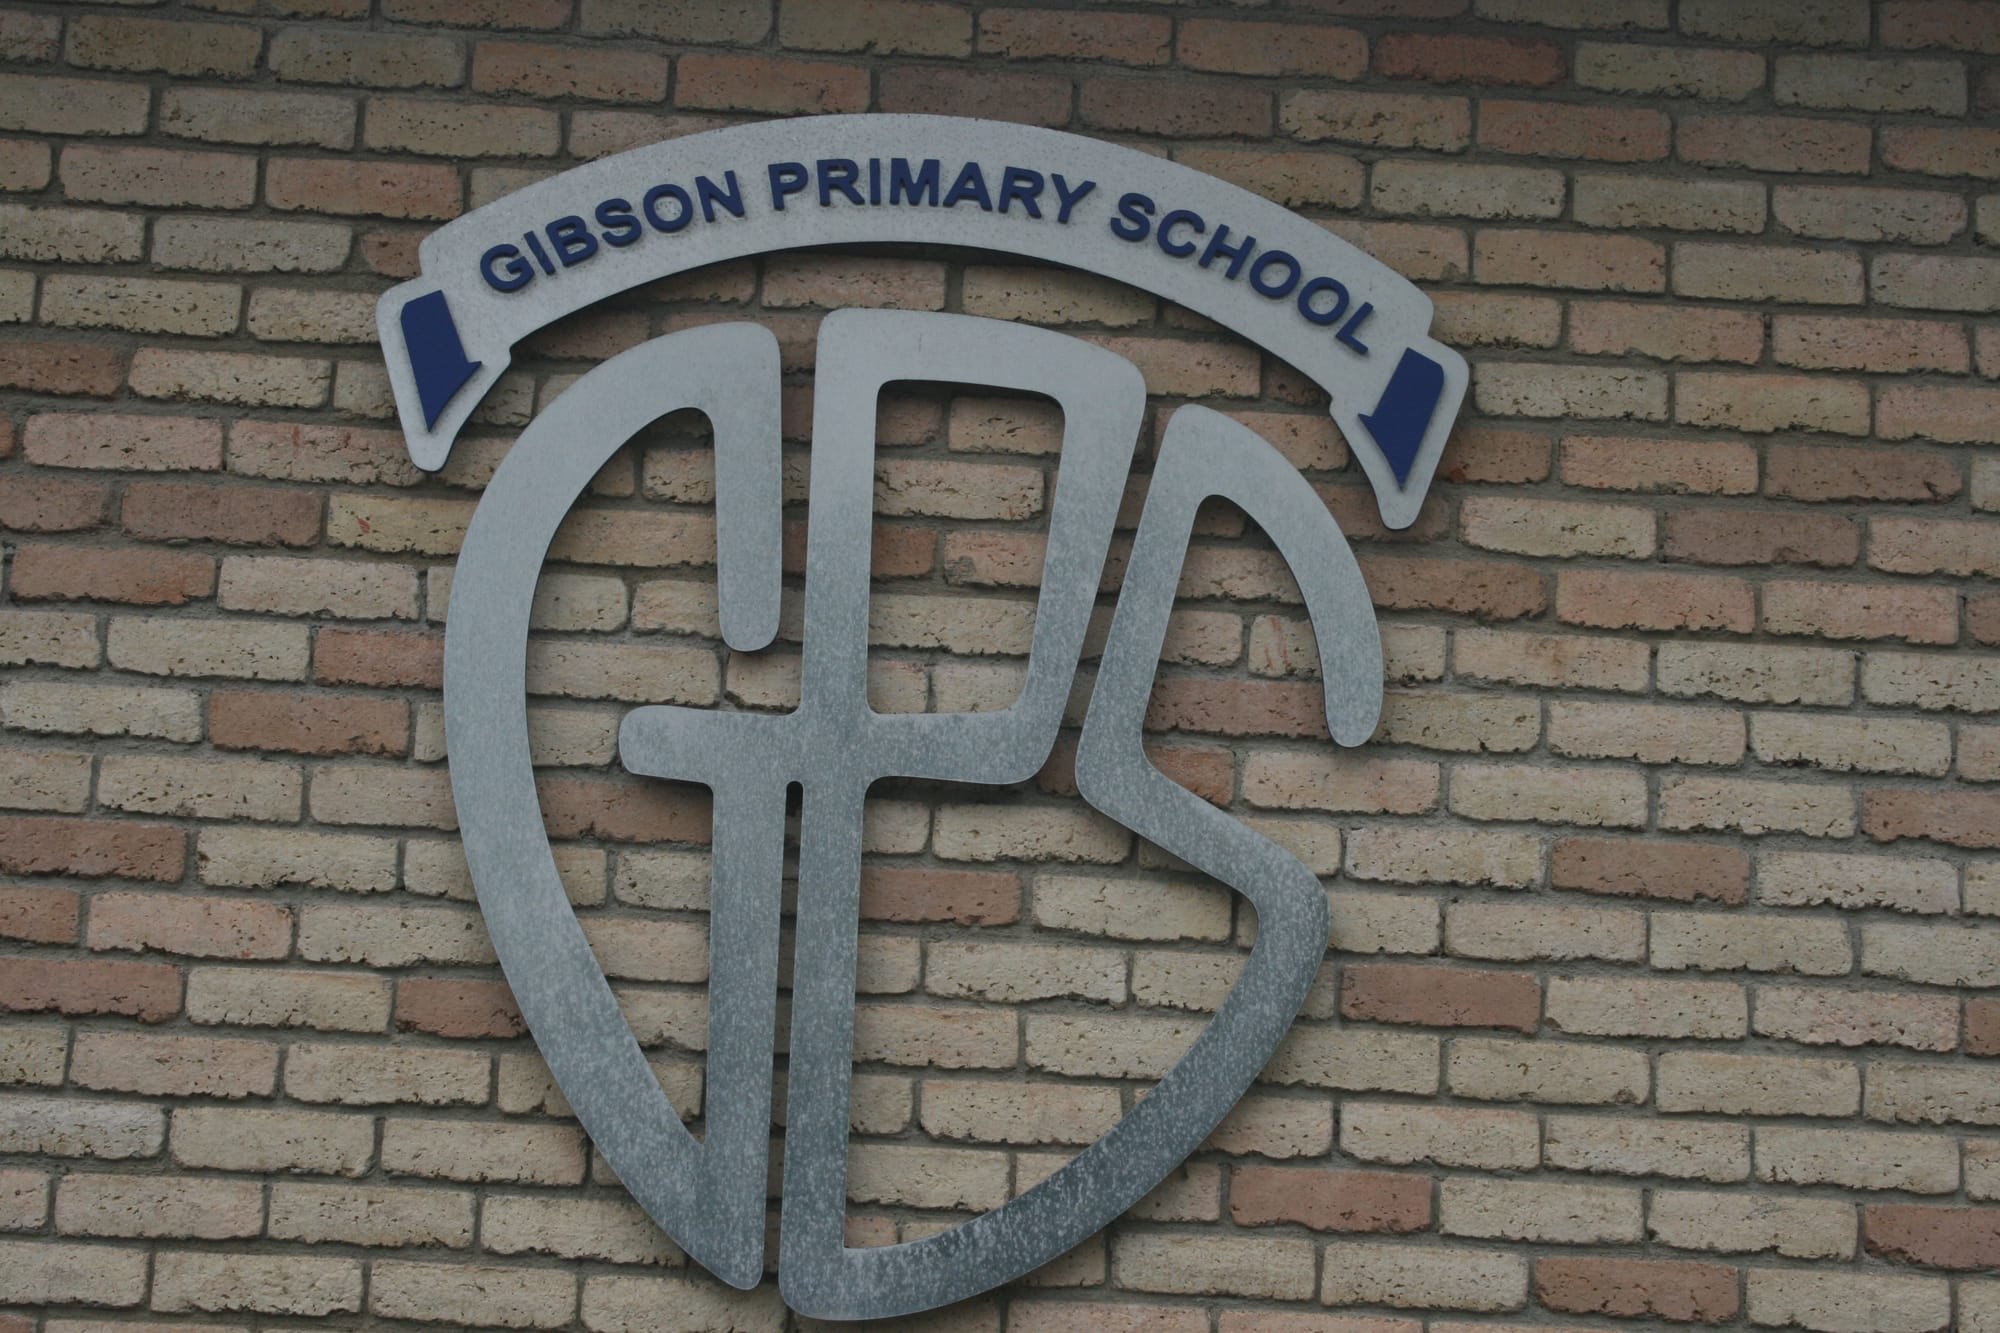 RALLY REPORT AT GIBSON PRIMARY SCHOOL OMAGH 24 - 26th JUNE 2022